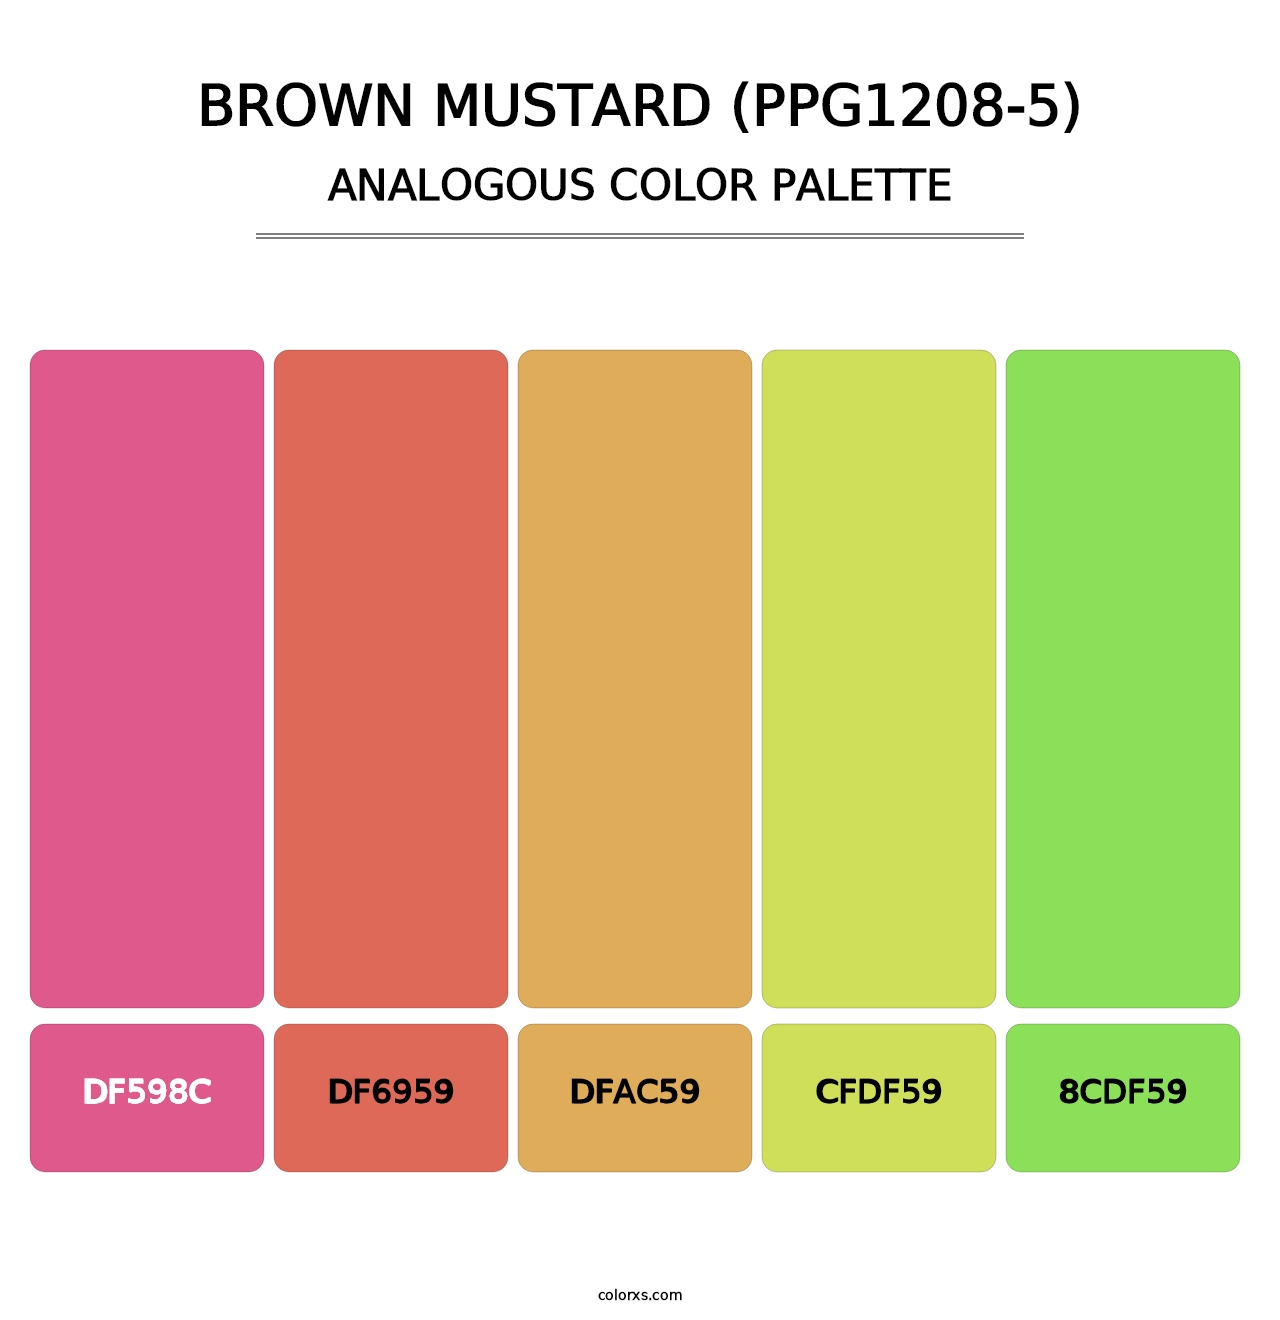 Brown Mustard (PPG1208-5) - Analogous Color Palette